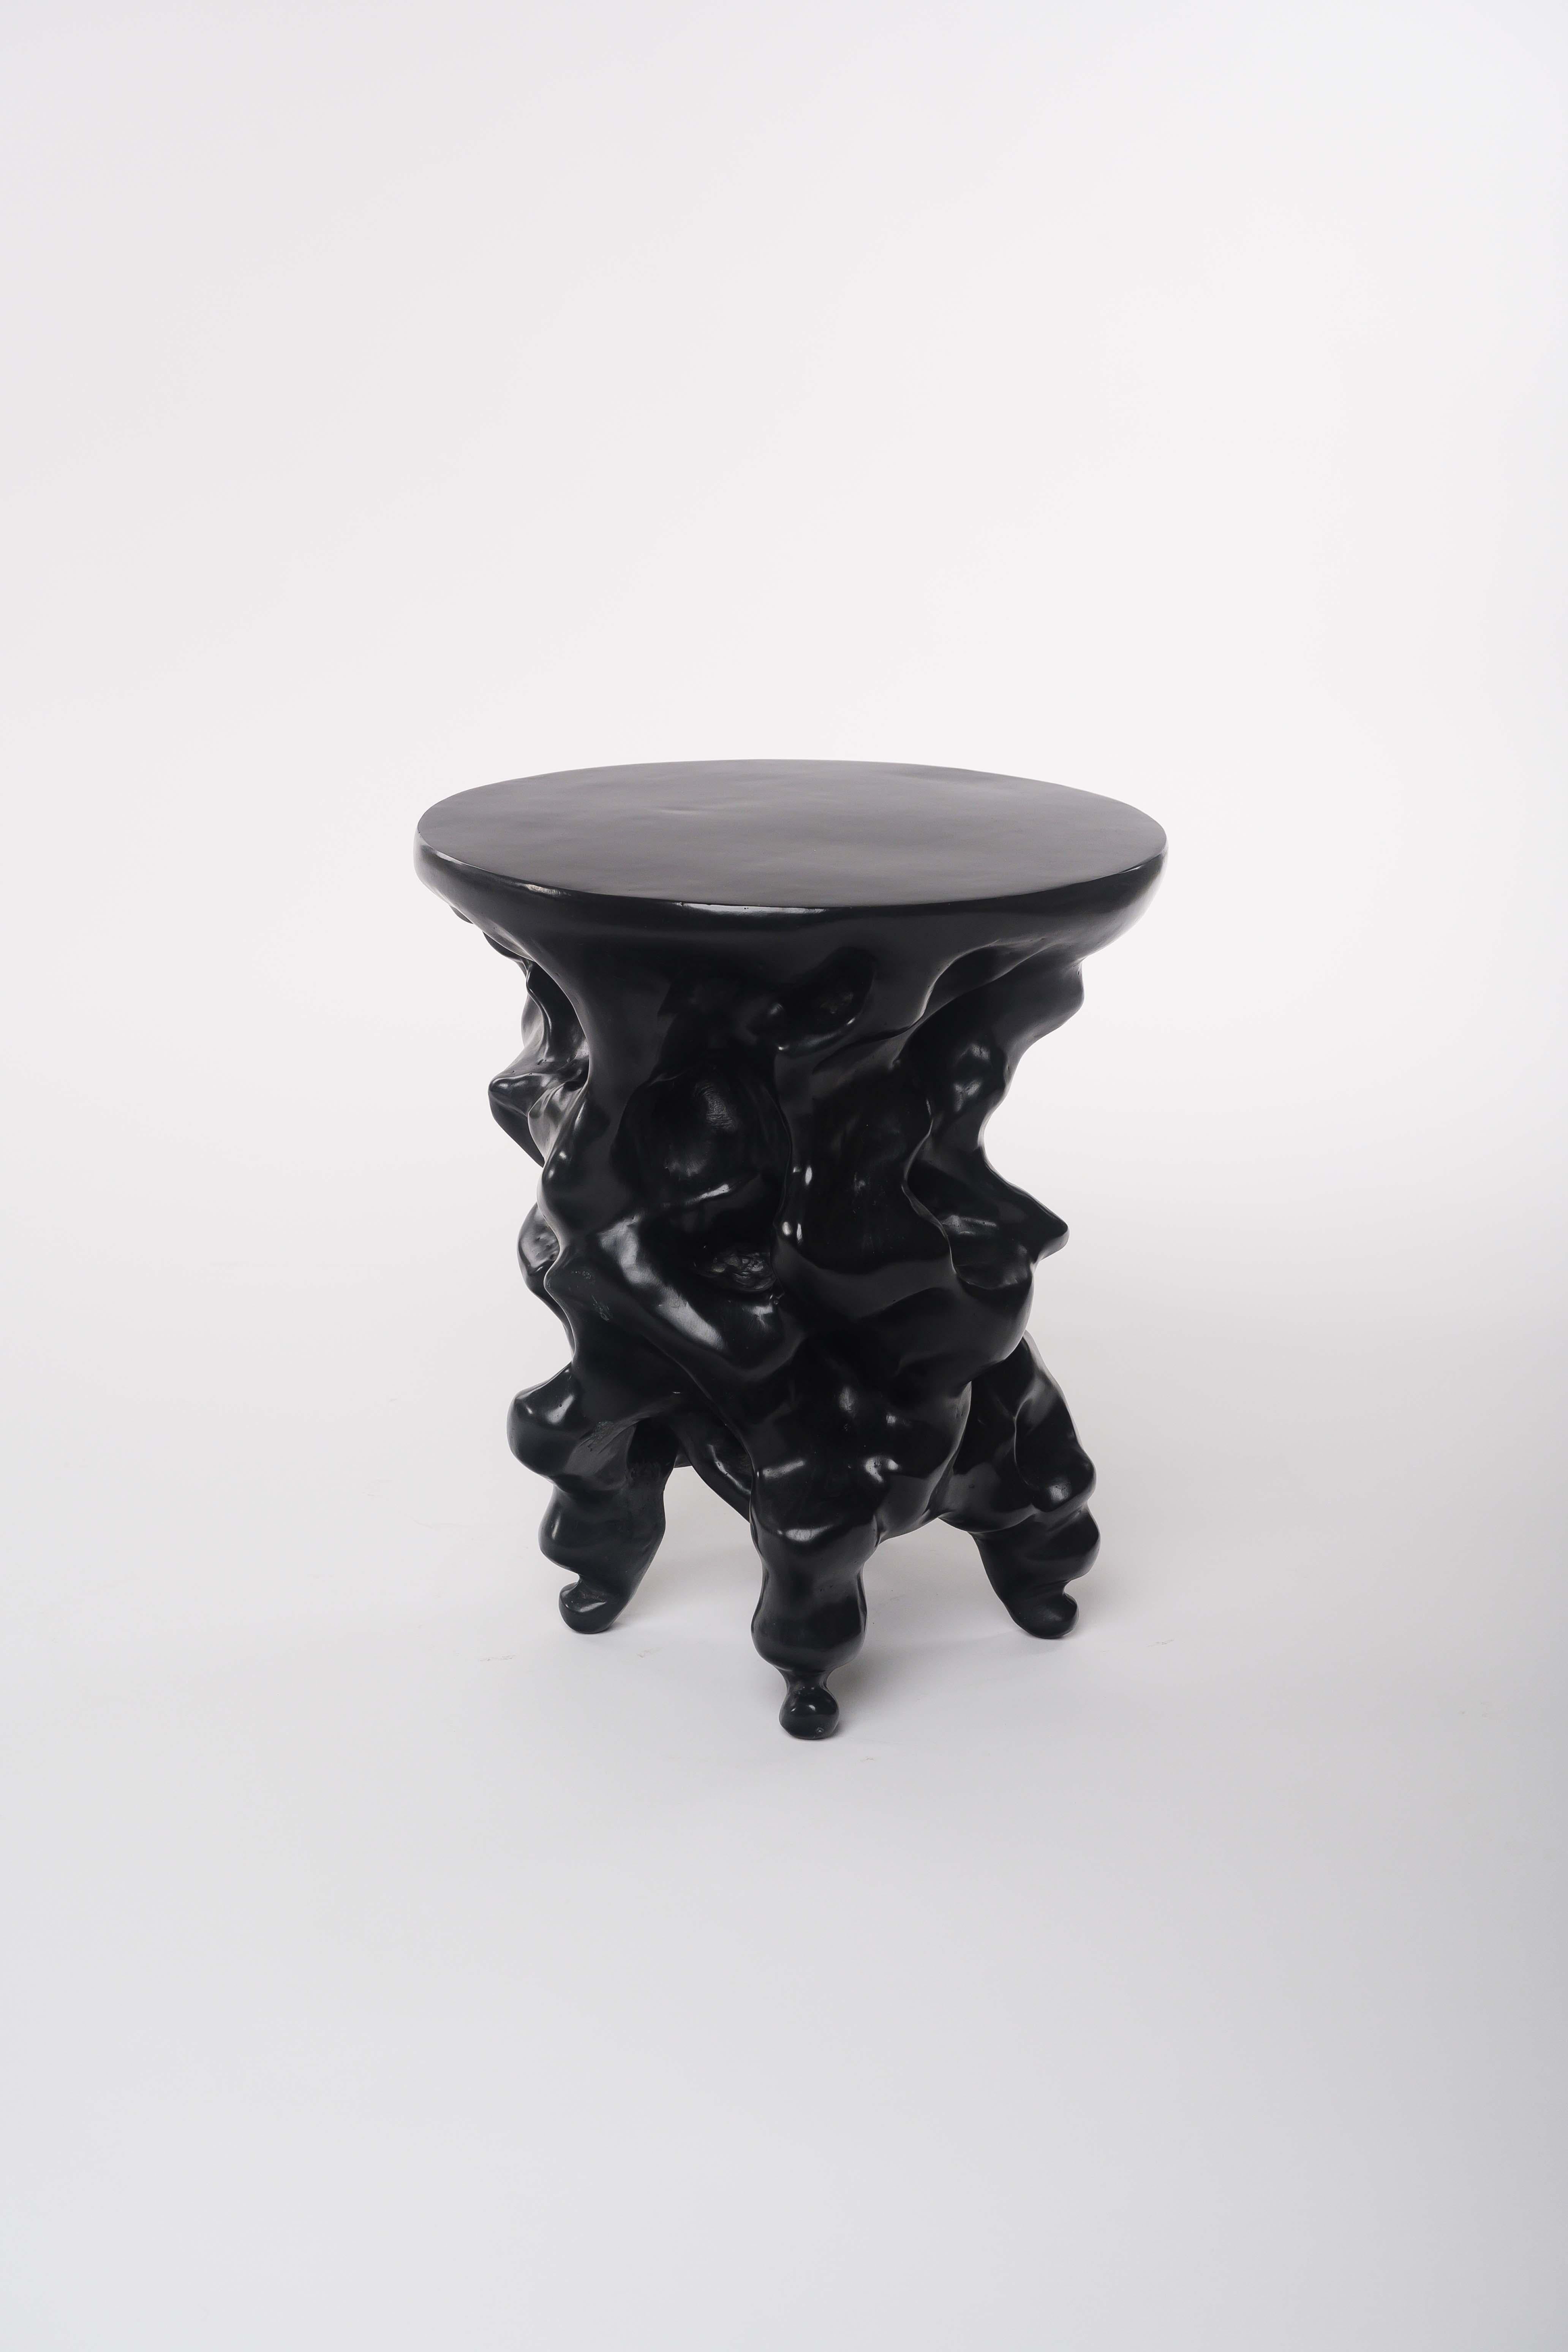 Sculptural Cave Stool in Dark Bronze by Elan Atelier

Inspired by the Chinese scholars' stones and brush pots, the cave stool is a wonderous sculptural form. Shown in our dark bronze finish. 

Custom sizes and finishes are available.